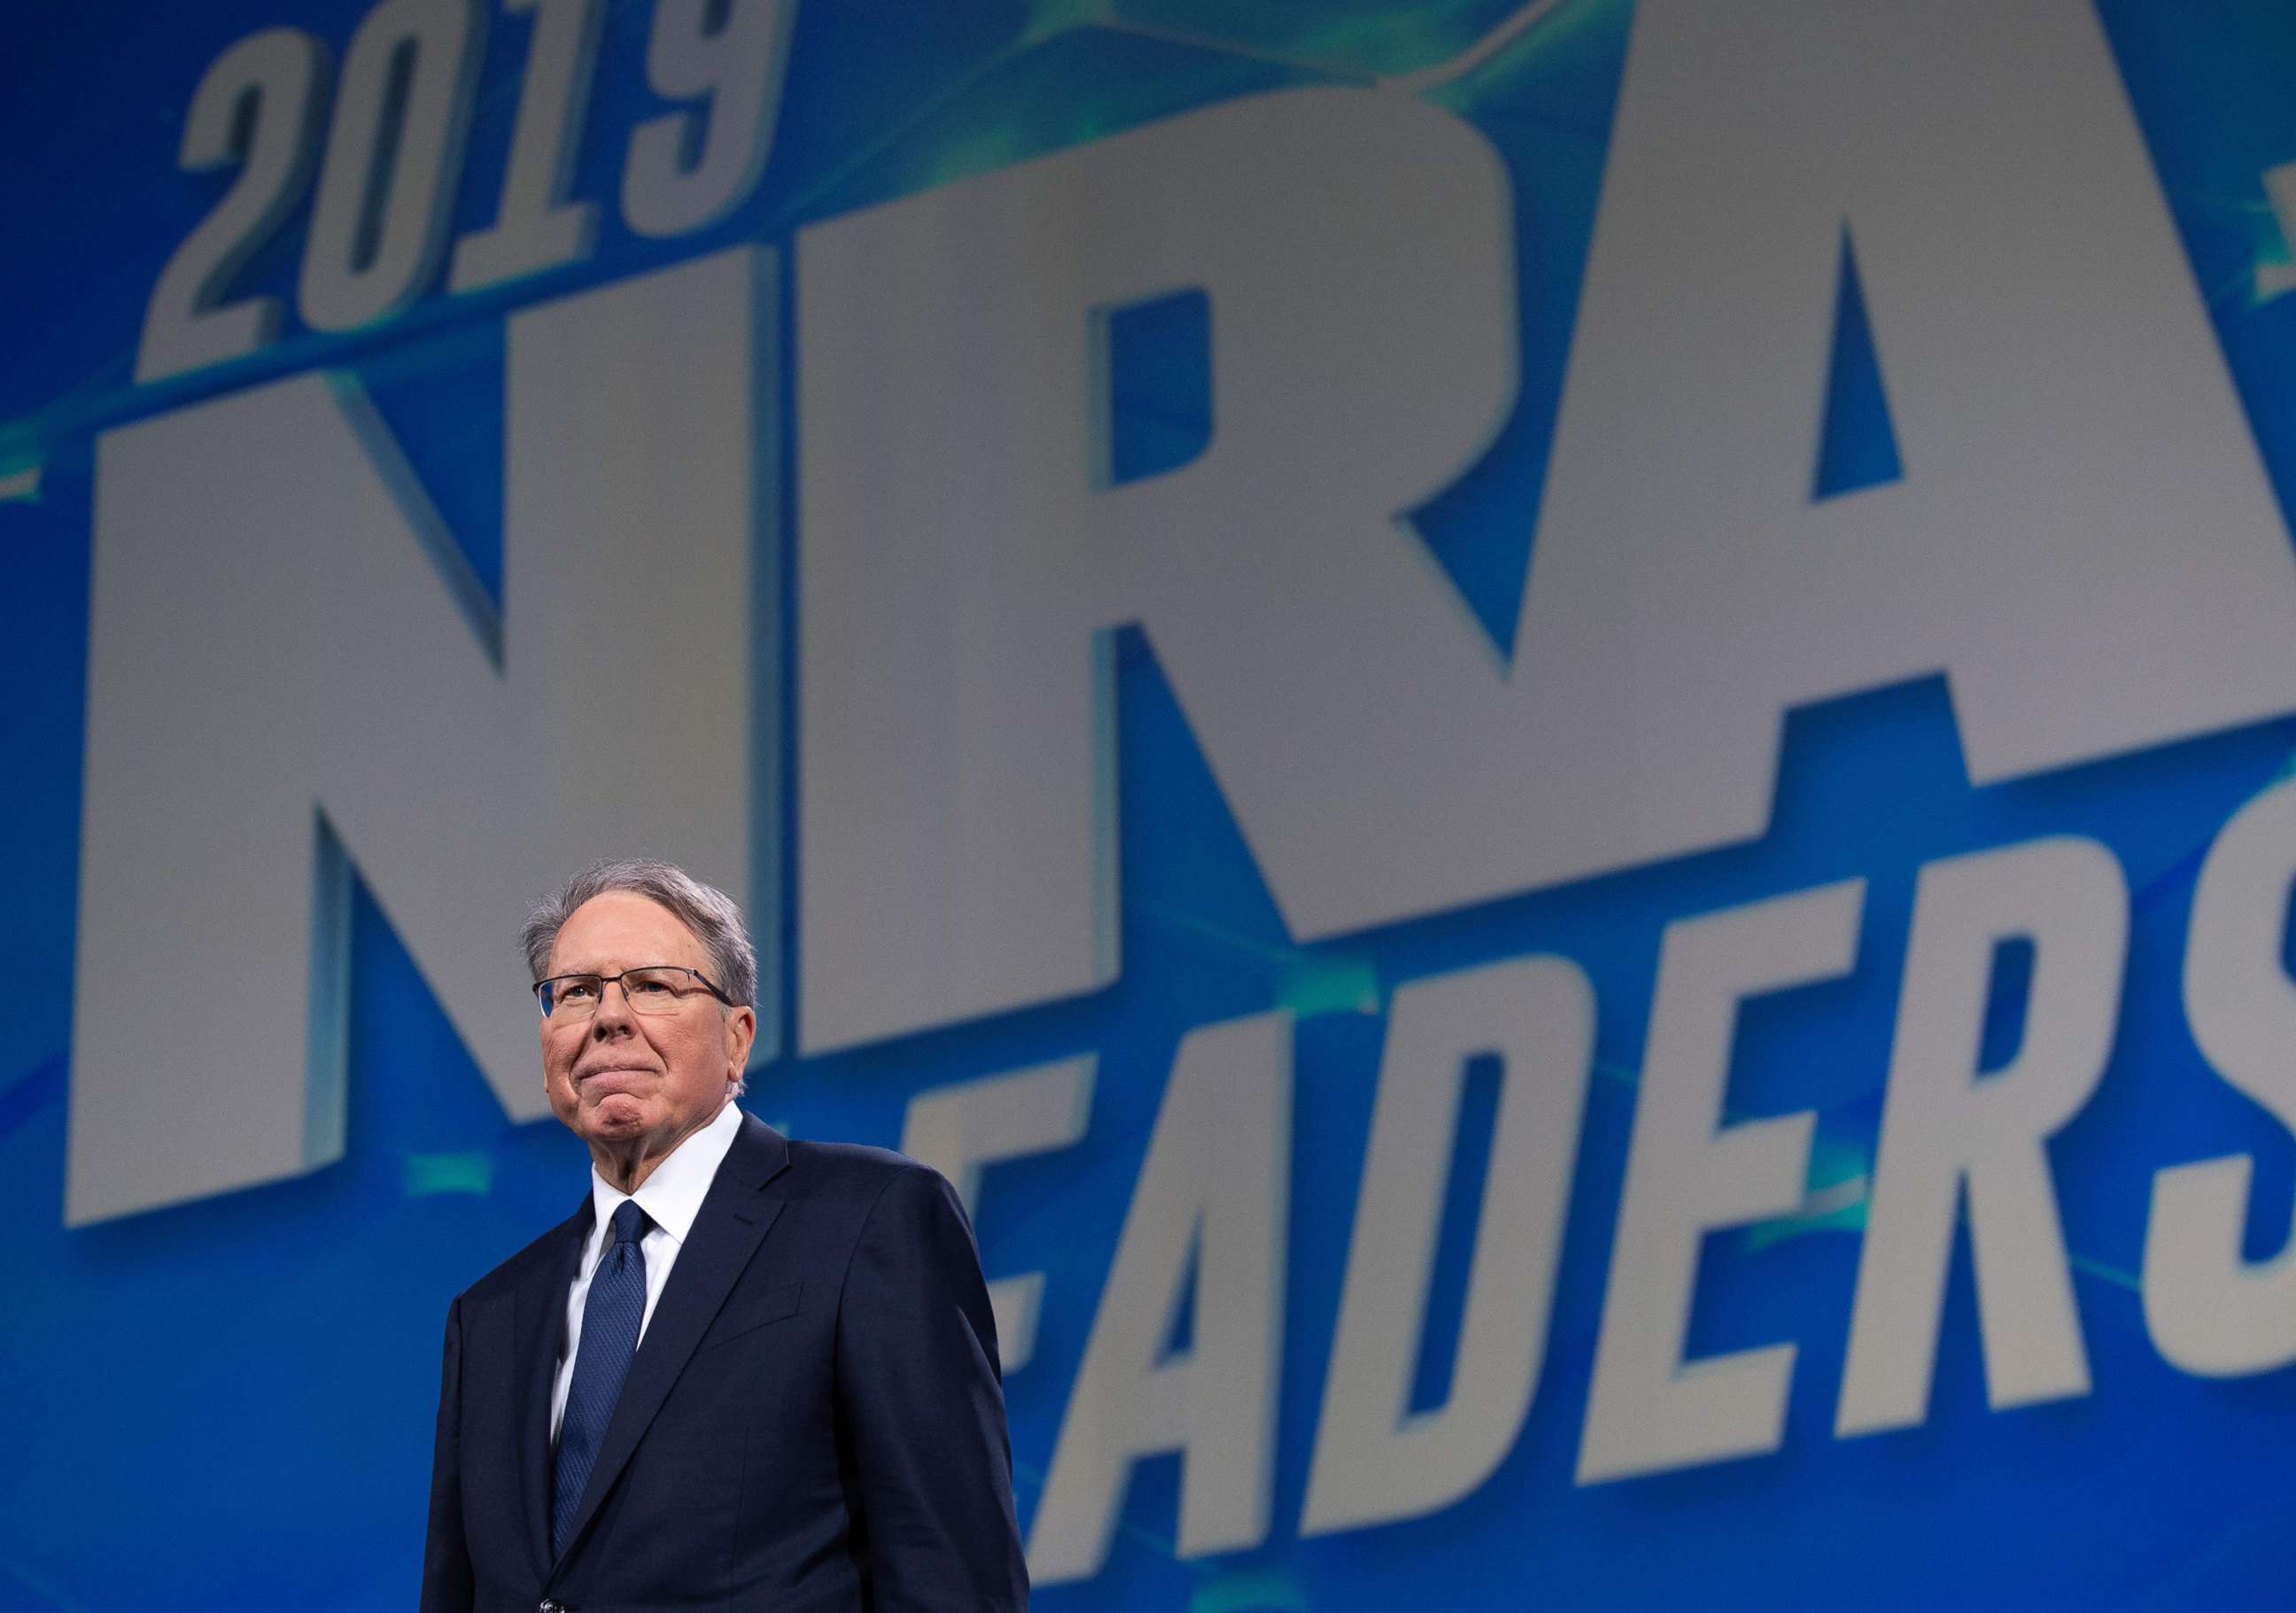 PHOTO: In this file photo taken on April 26, 2019, Wayne LaPierre, Executive Vice President and Chief Executive Officer of the NRA at Lucas Oil Stadium in Indianapolis.